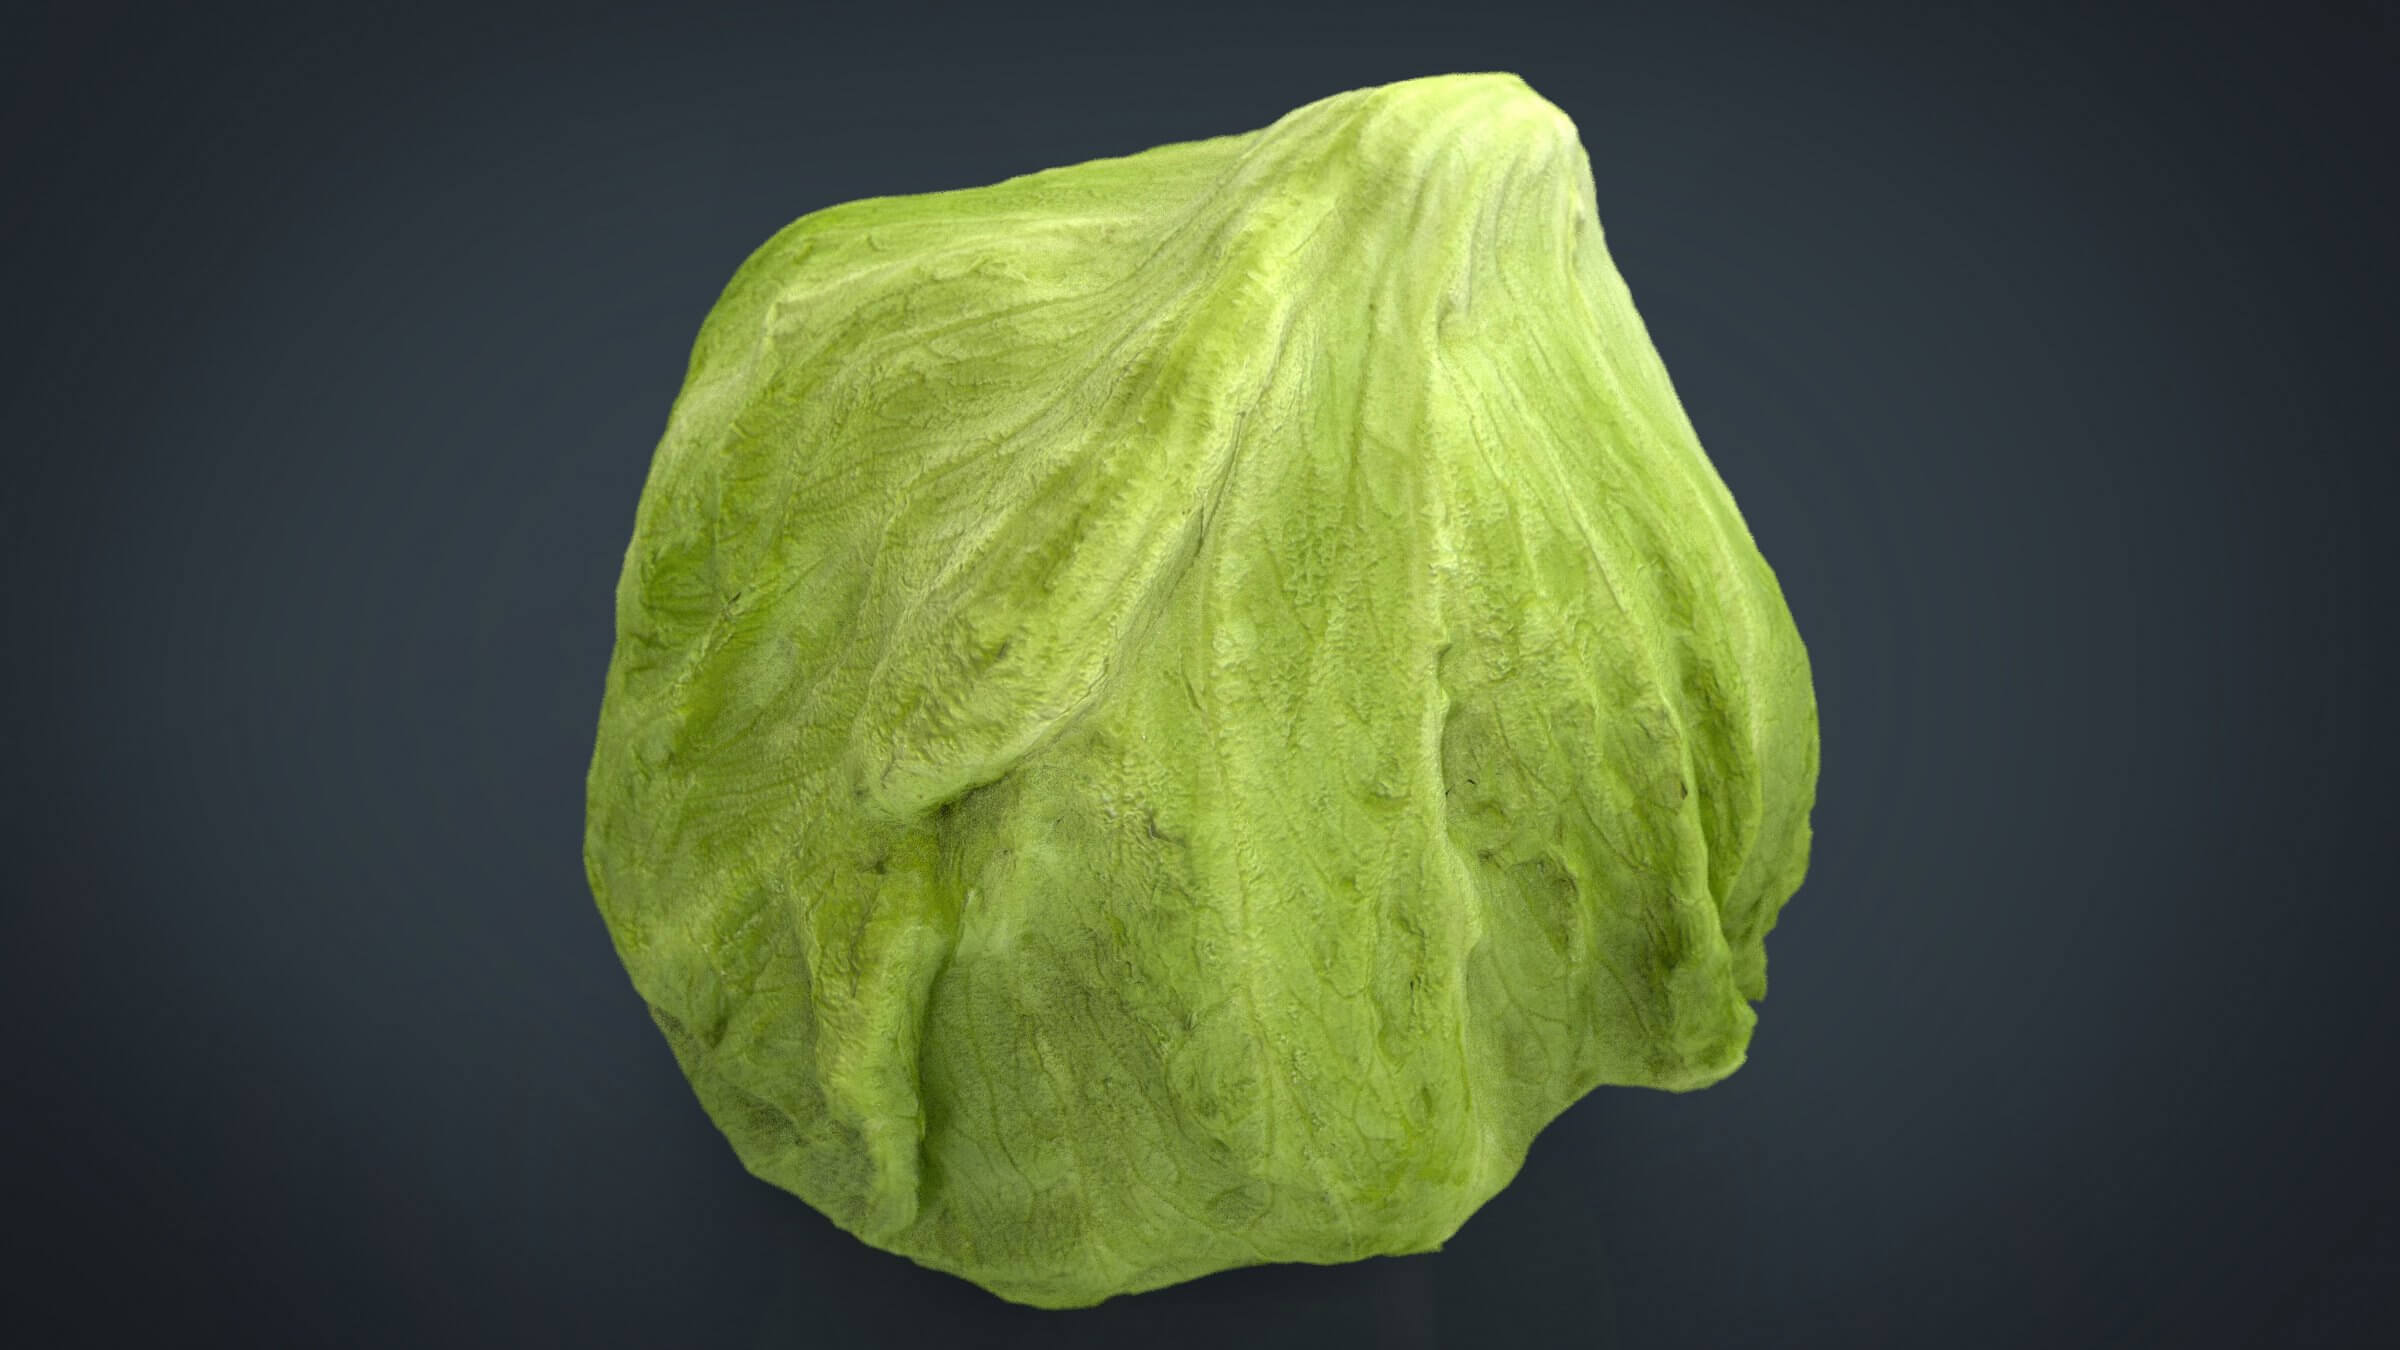 Iceberg Lettuce: Nutrition, Calories, and Recipes